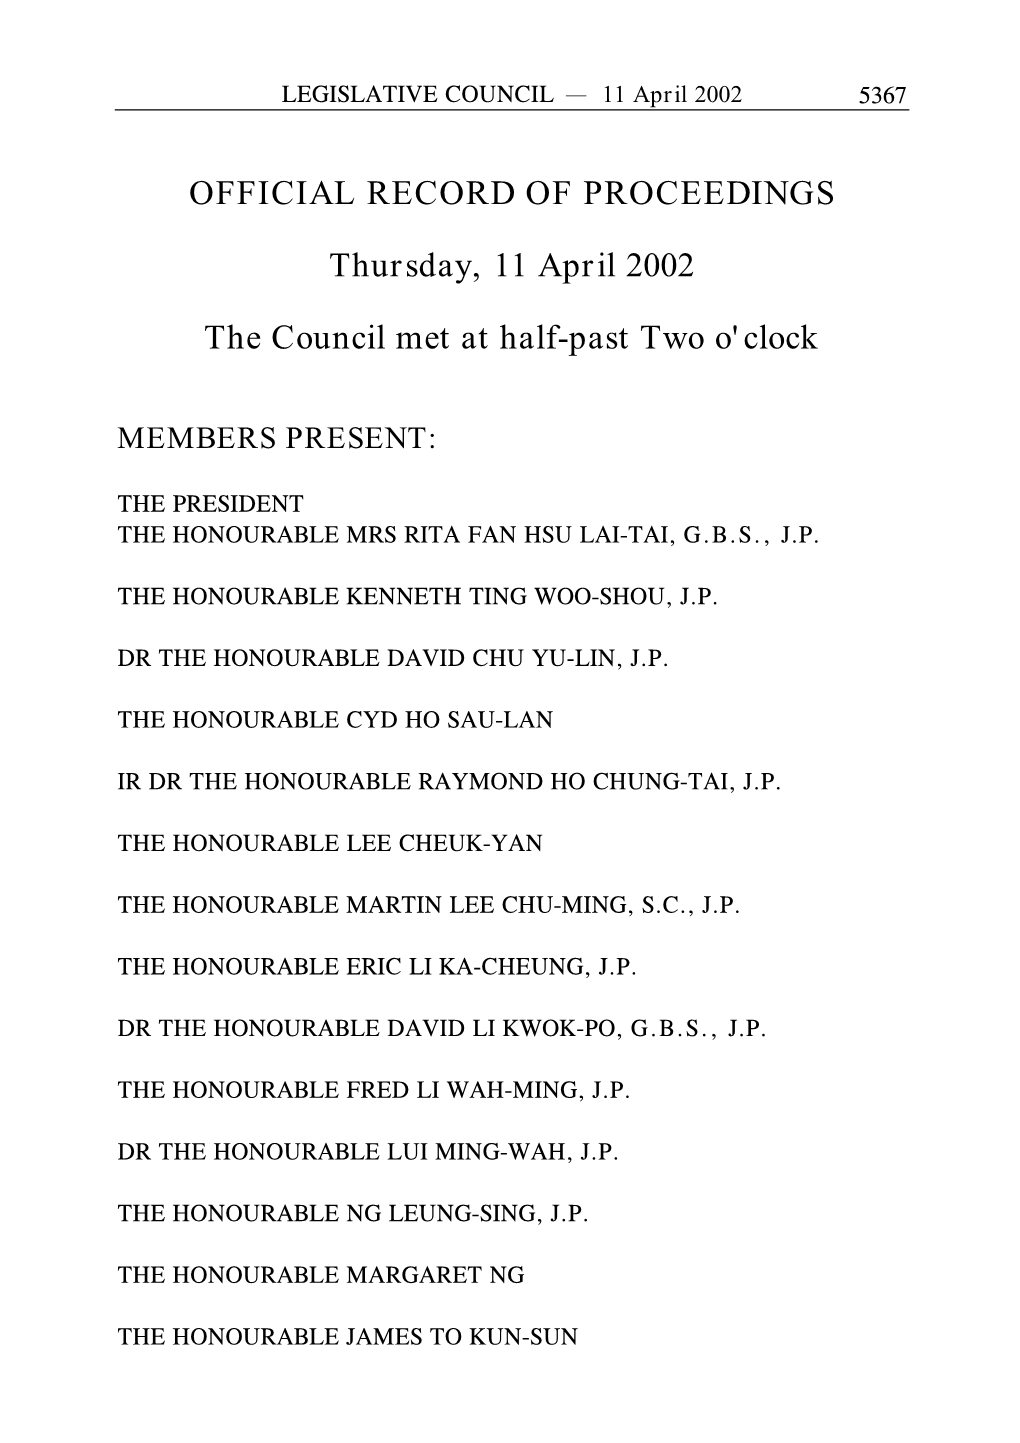 OFFICIAL RECORD of PROCEEDINGS Thursday, 11 April